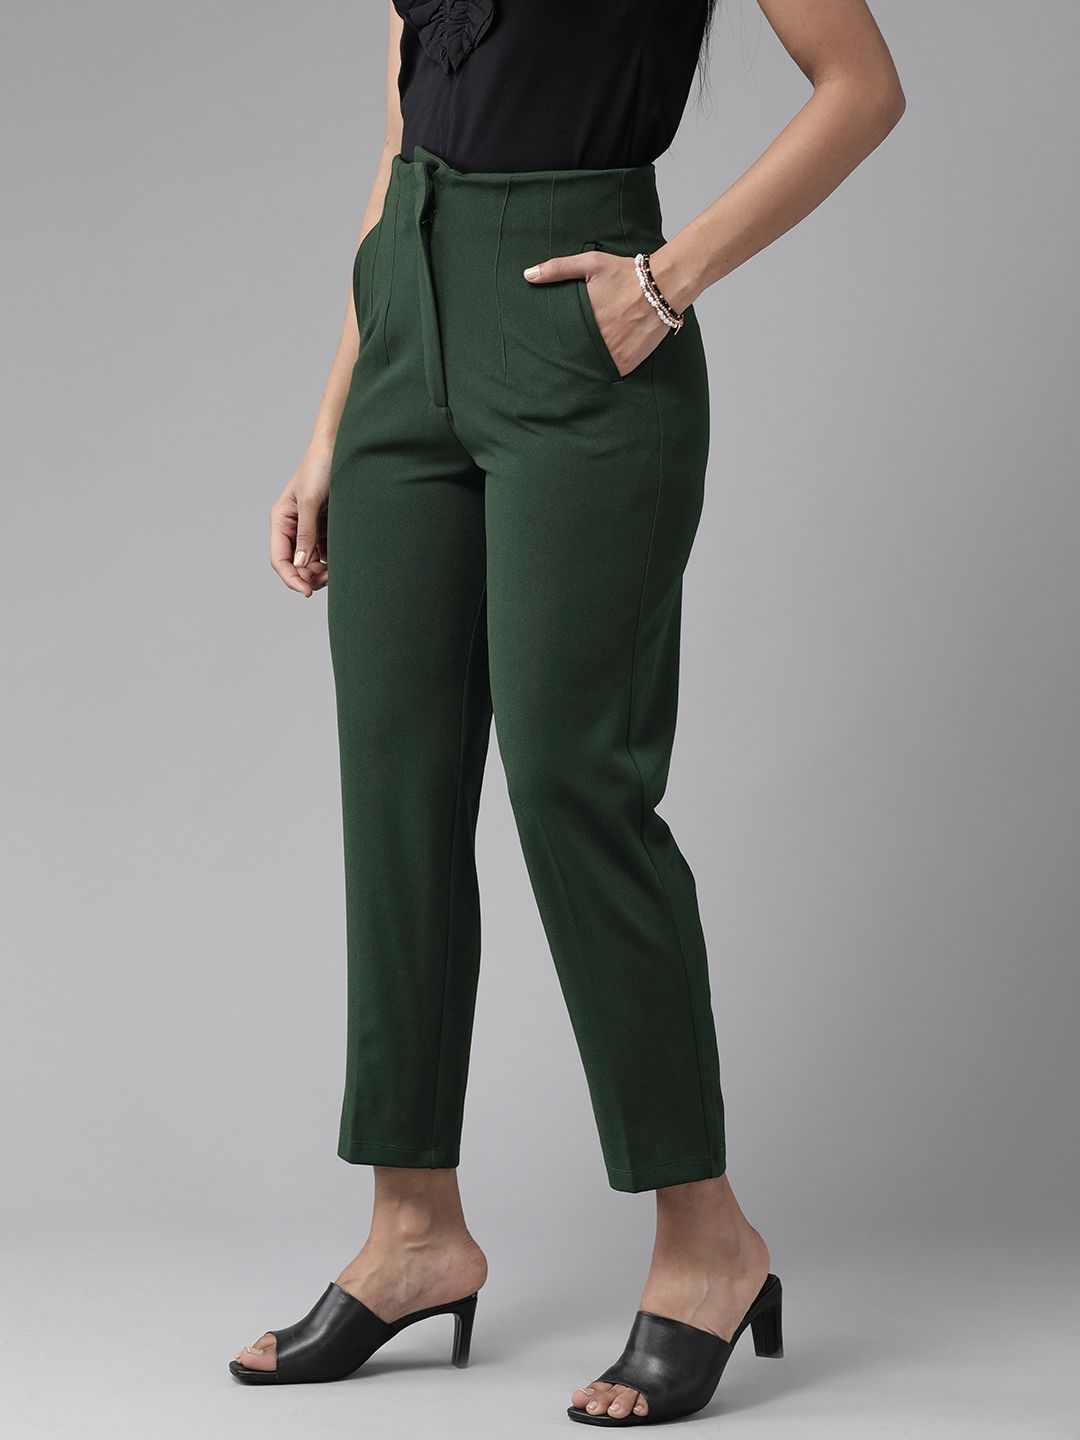 KASSUALLY Women Green Solid Peg Trousers Price in India